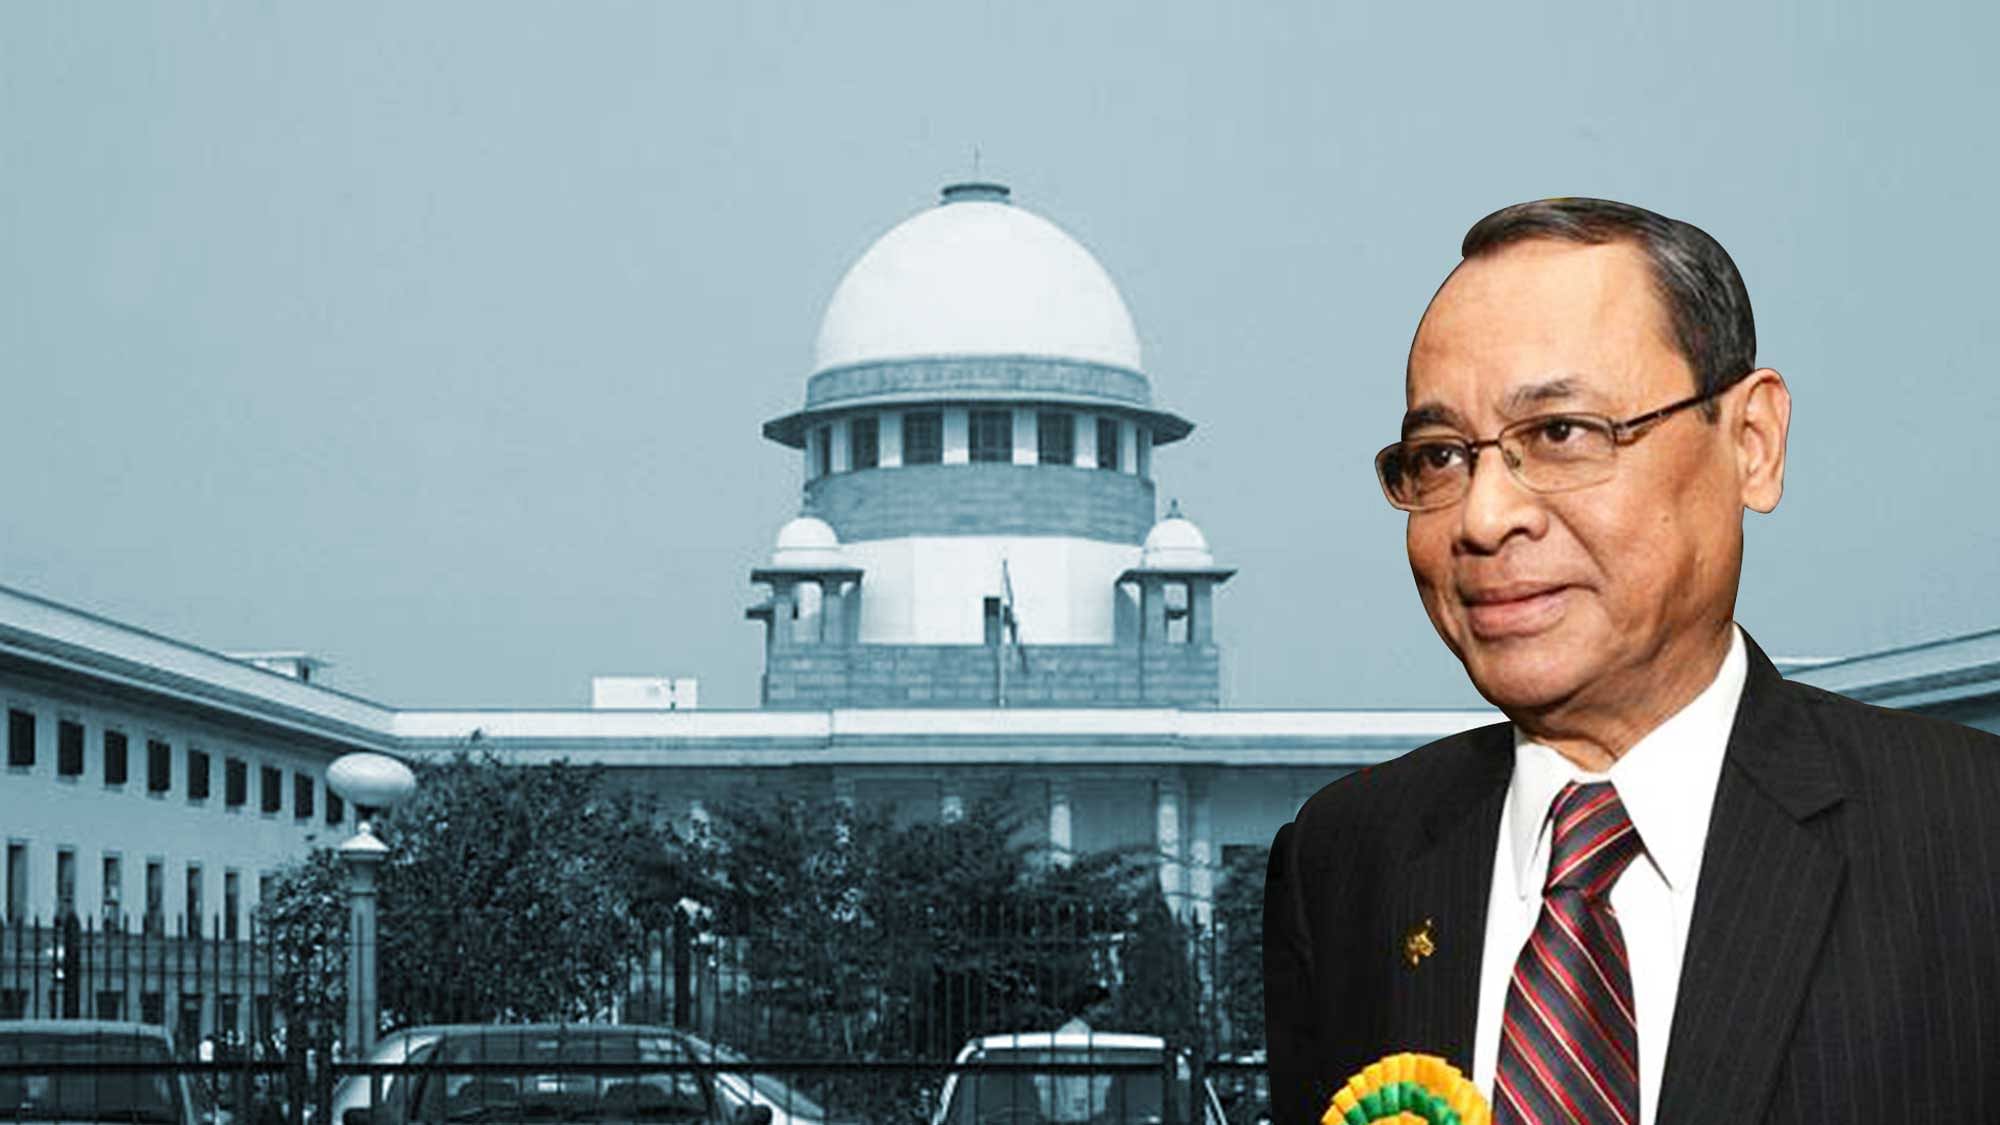 Justice Ranjan Gogoi was sworn in as the 46th Chief Justice of India on 3 October 2018.